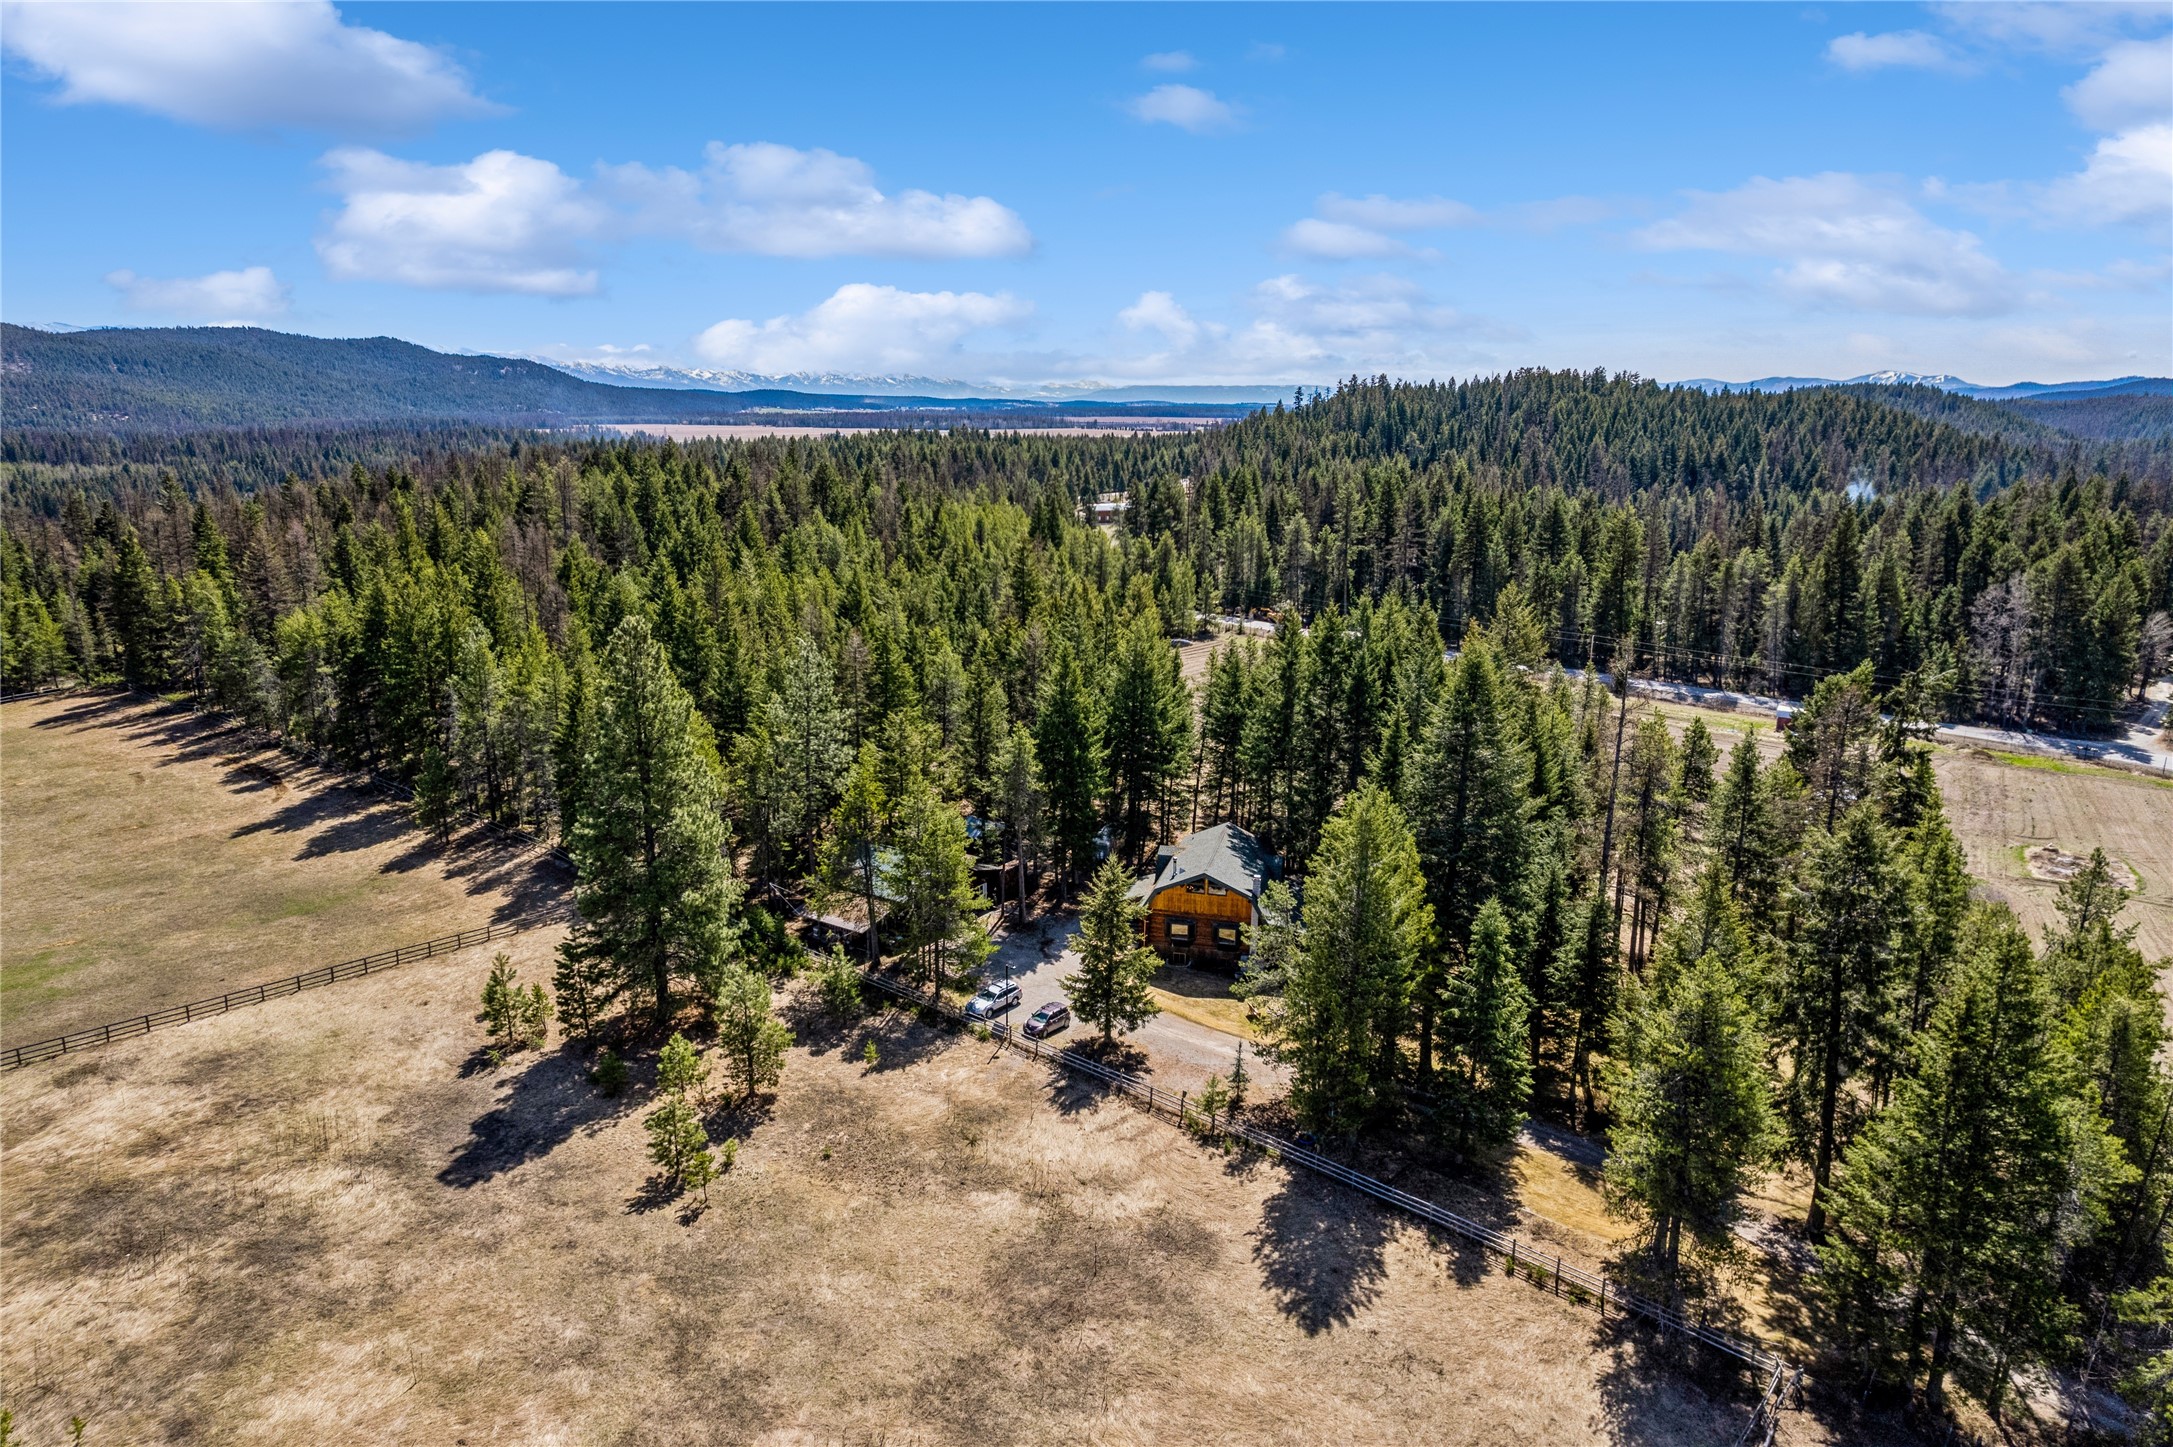 SUBSTANTIAL PRICE IMPROVEMENT! One of a kind setting less than 10 minutes from downtown Whitefish that could be used for Short-term rentals. Brand new septic system in 2023. Privacy on ~3 parked out acres perfect for the horse enthusiast or gardener! Beautiful custom home with massive 18'' logs, vaulted ceilings, and the main level deck and walk-out patio are perfect for cozy living or incredible entertaining. House boasts a separate upper-level primary suite with attached bathroom, sitting area, and private porch to enjoy a morning coffee. Additional living space to be enjoyed in the daylight finished lower level with 3 bedrooms, full bathroom, laundry, and office space. Large detached shop is perfect for all your toys and other hobbies along with a full-finished 300sqft studio area. Rural living that offers easy access to recreational paradise yet close to all the amenities of both Whitefish and Kalispell. Contact Lindsey LivingGood at 406-270-4453, or your real estate professional.